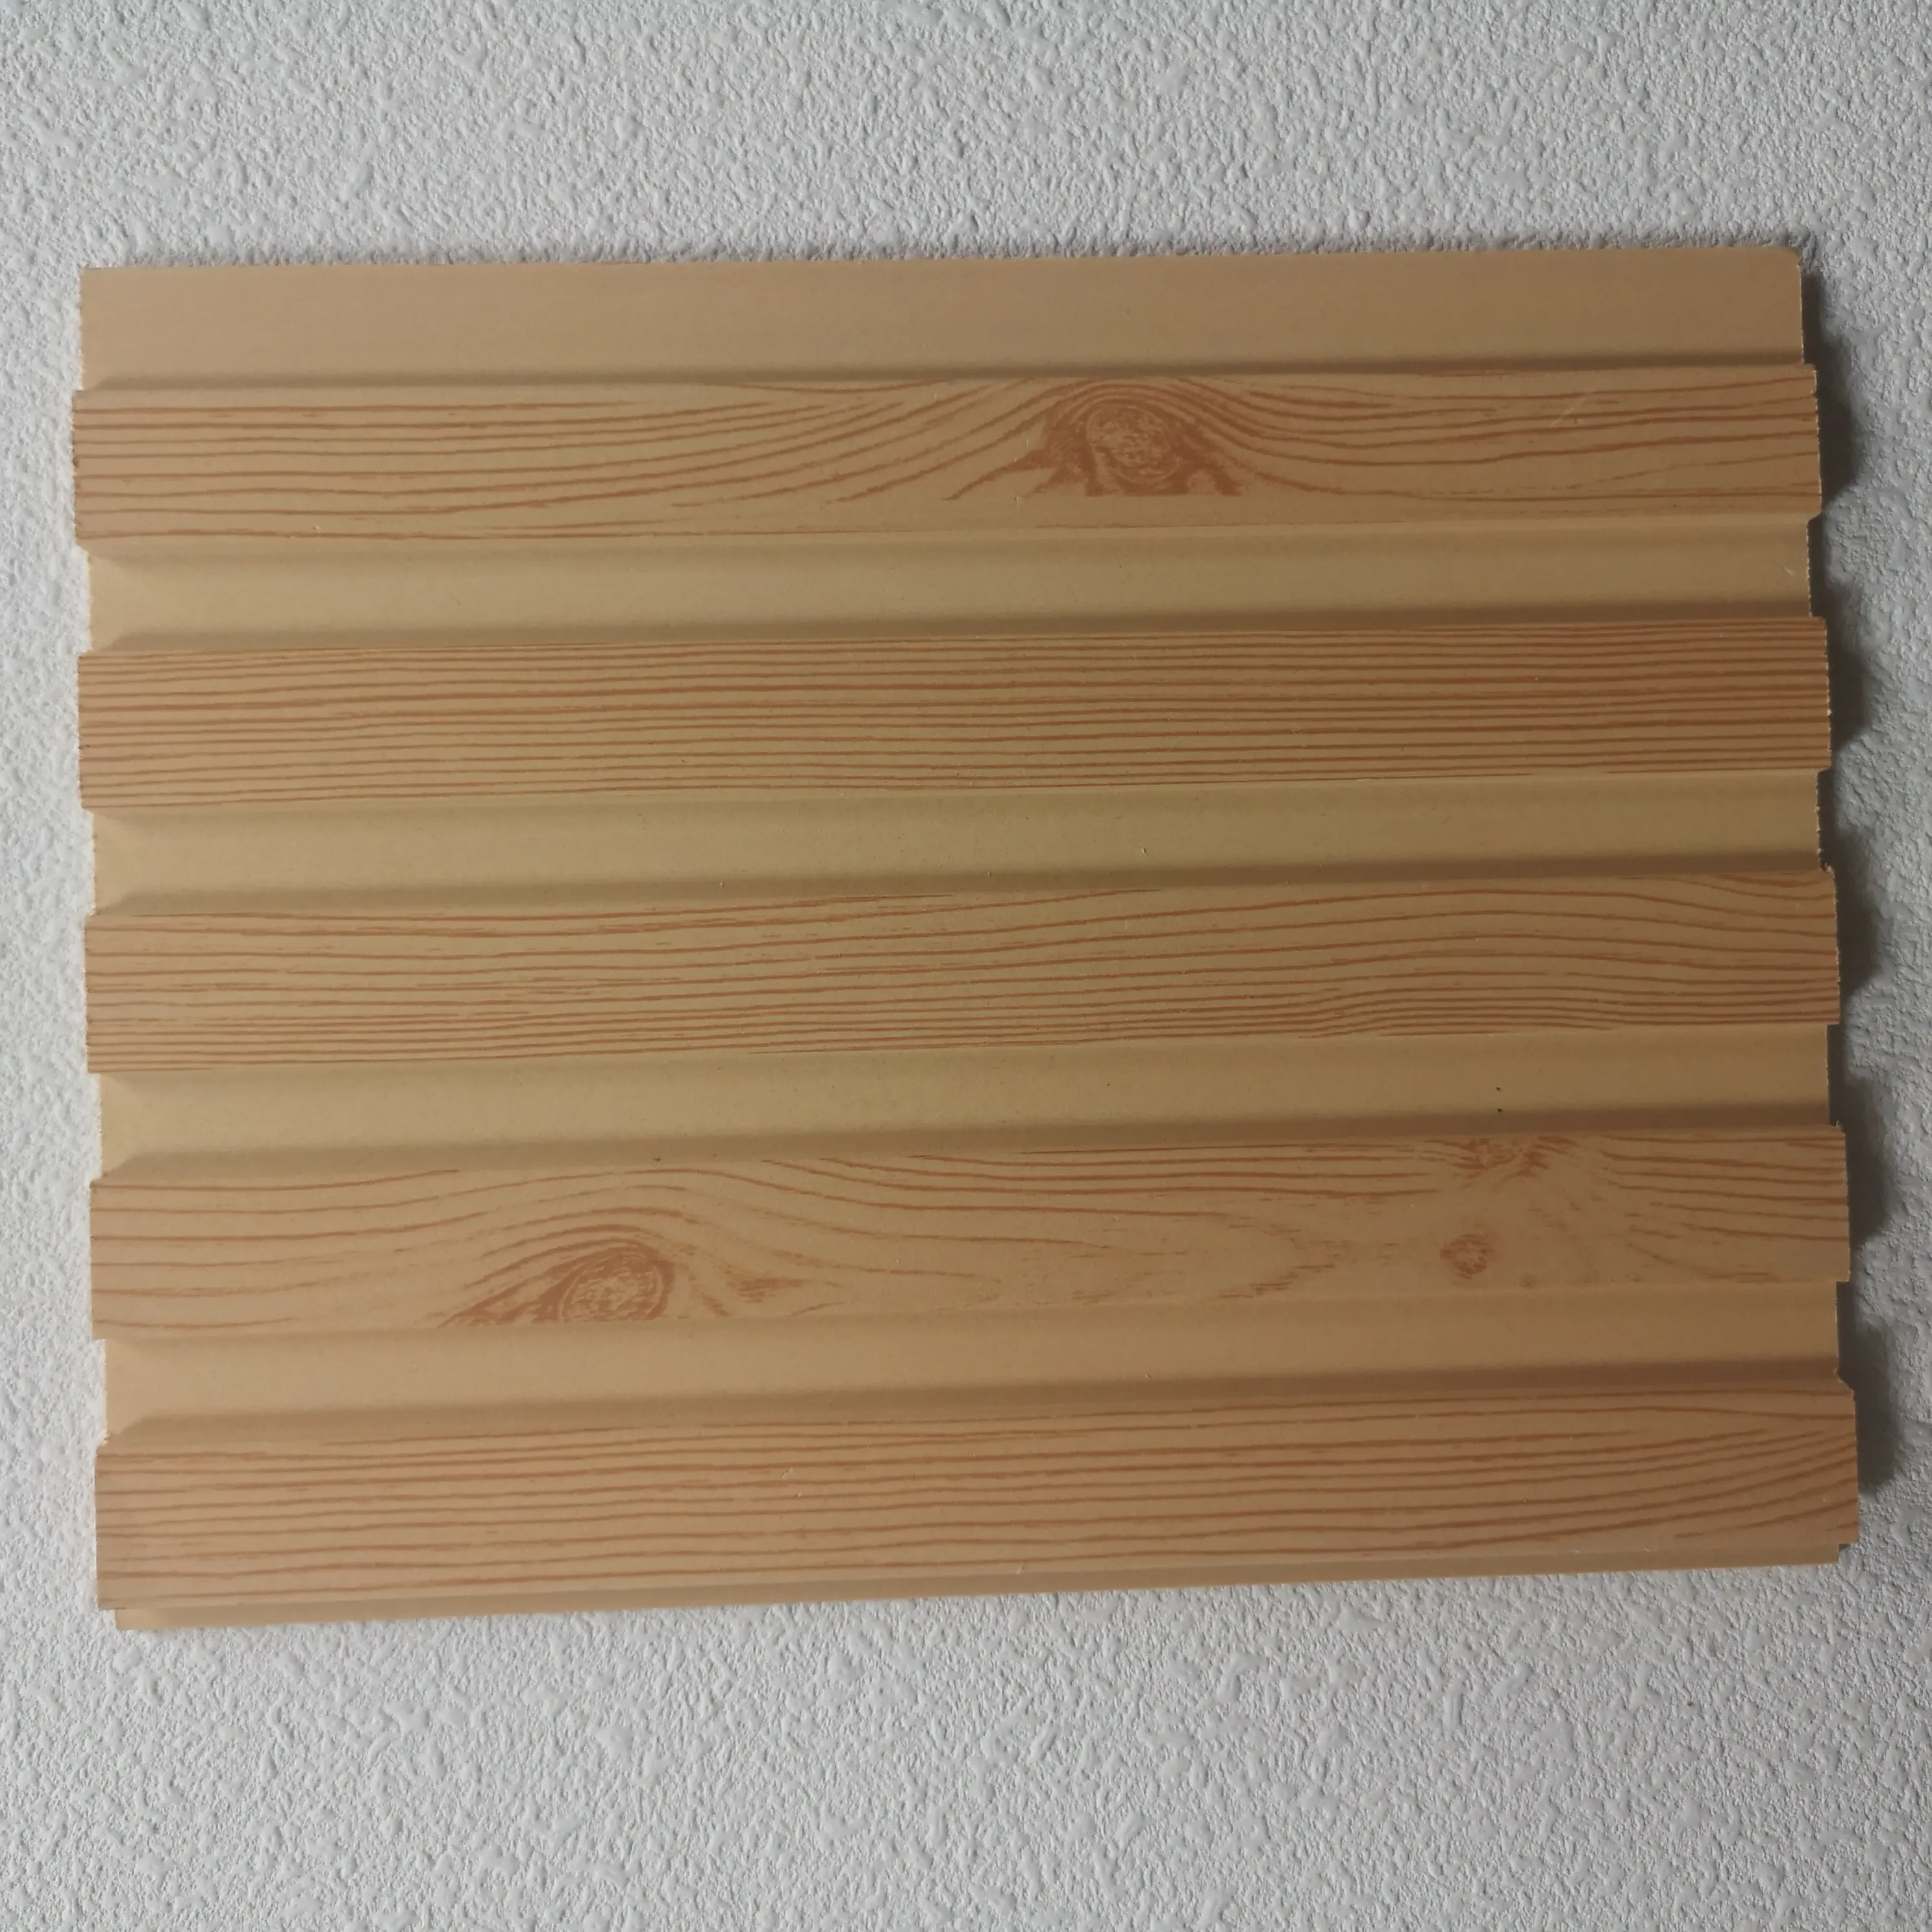 Cheap high quality quick installation wood grain wpc pvc wall ceilings with waterproof fireproof soundproof function